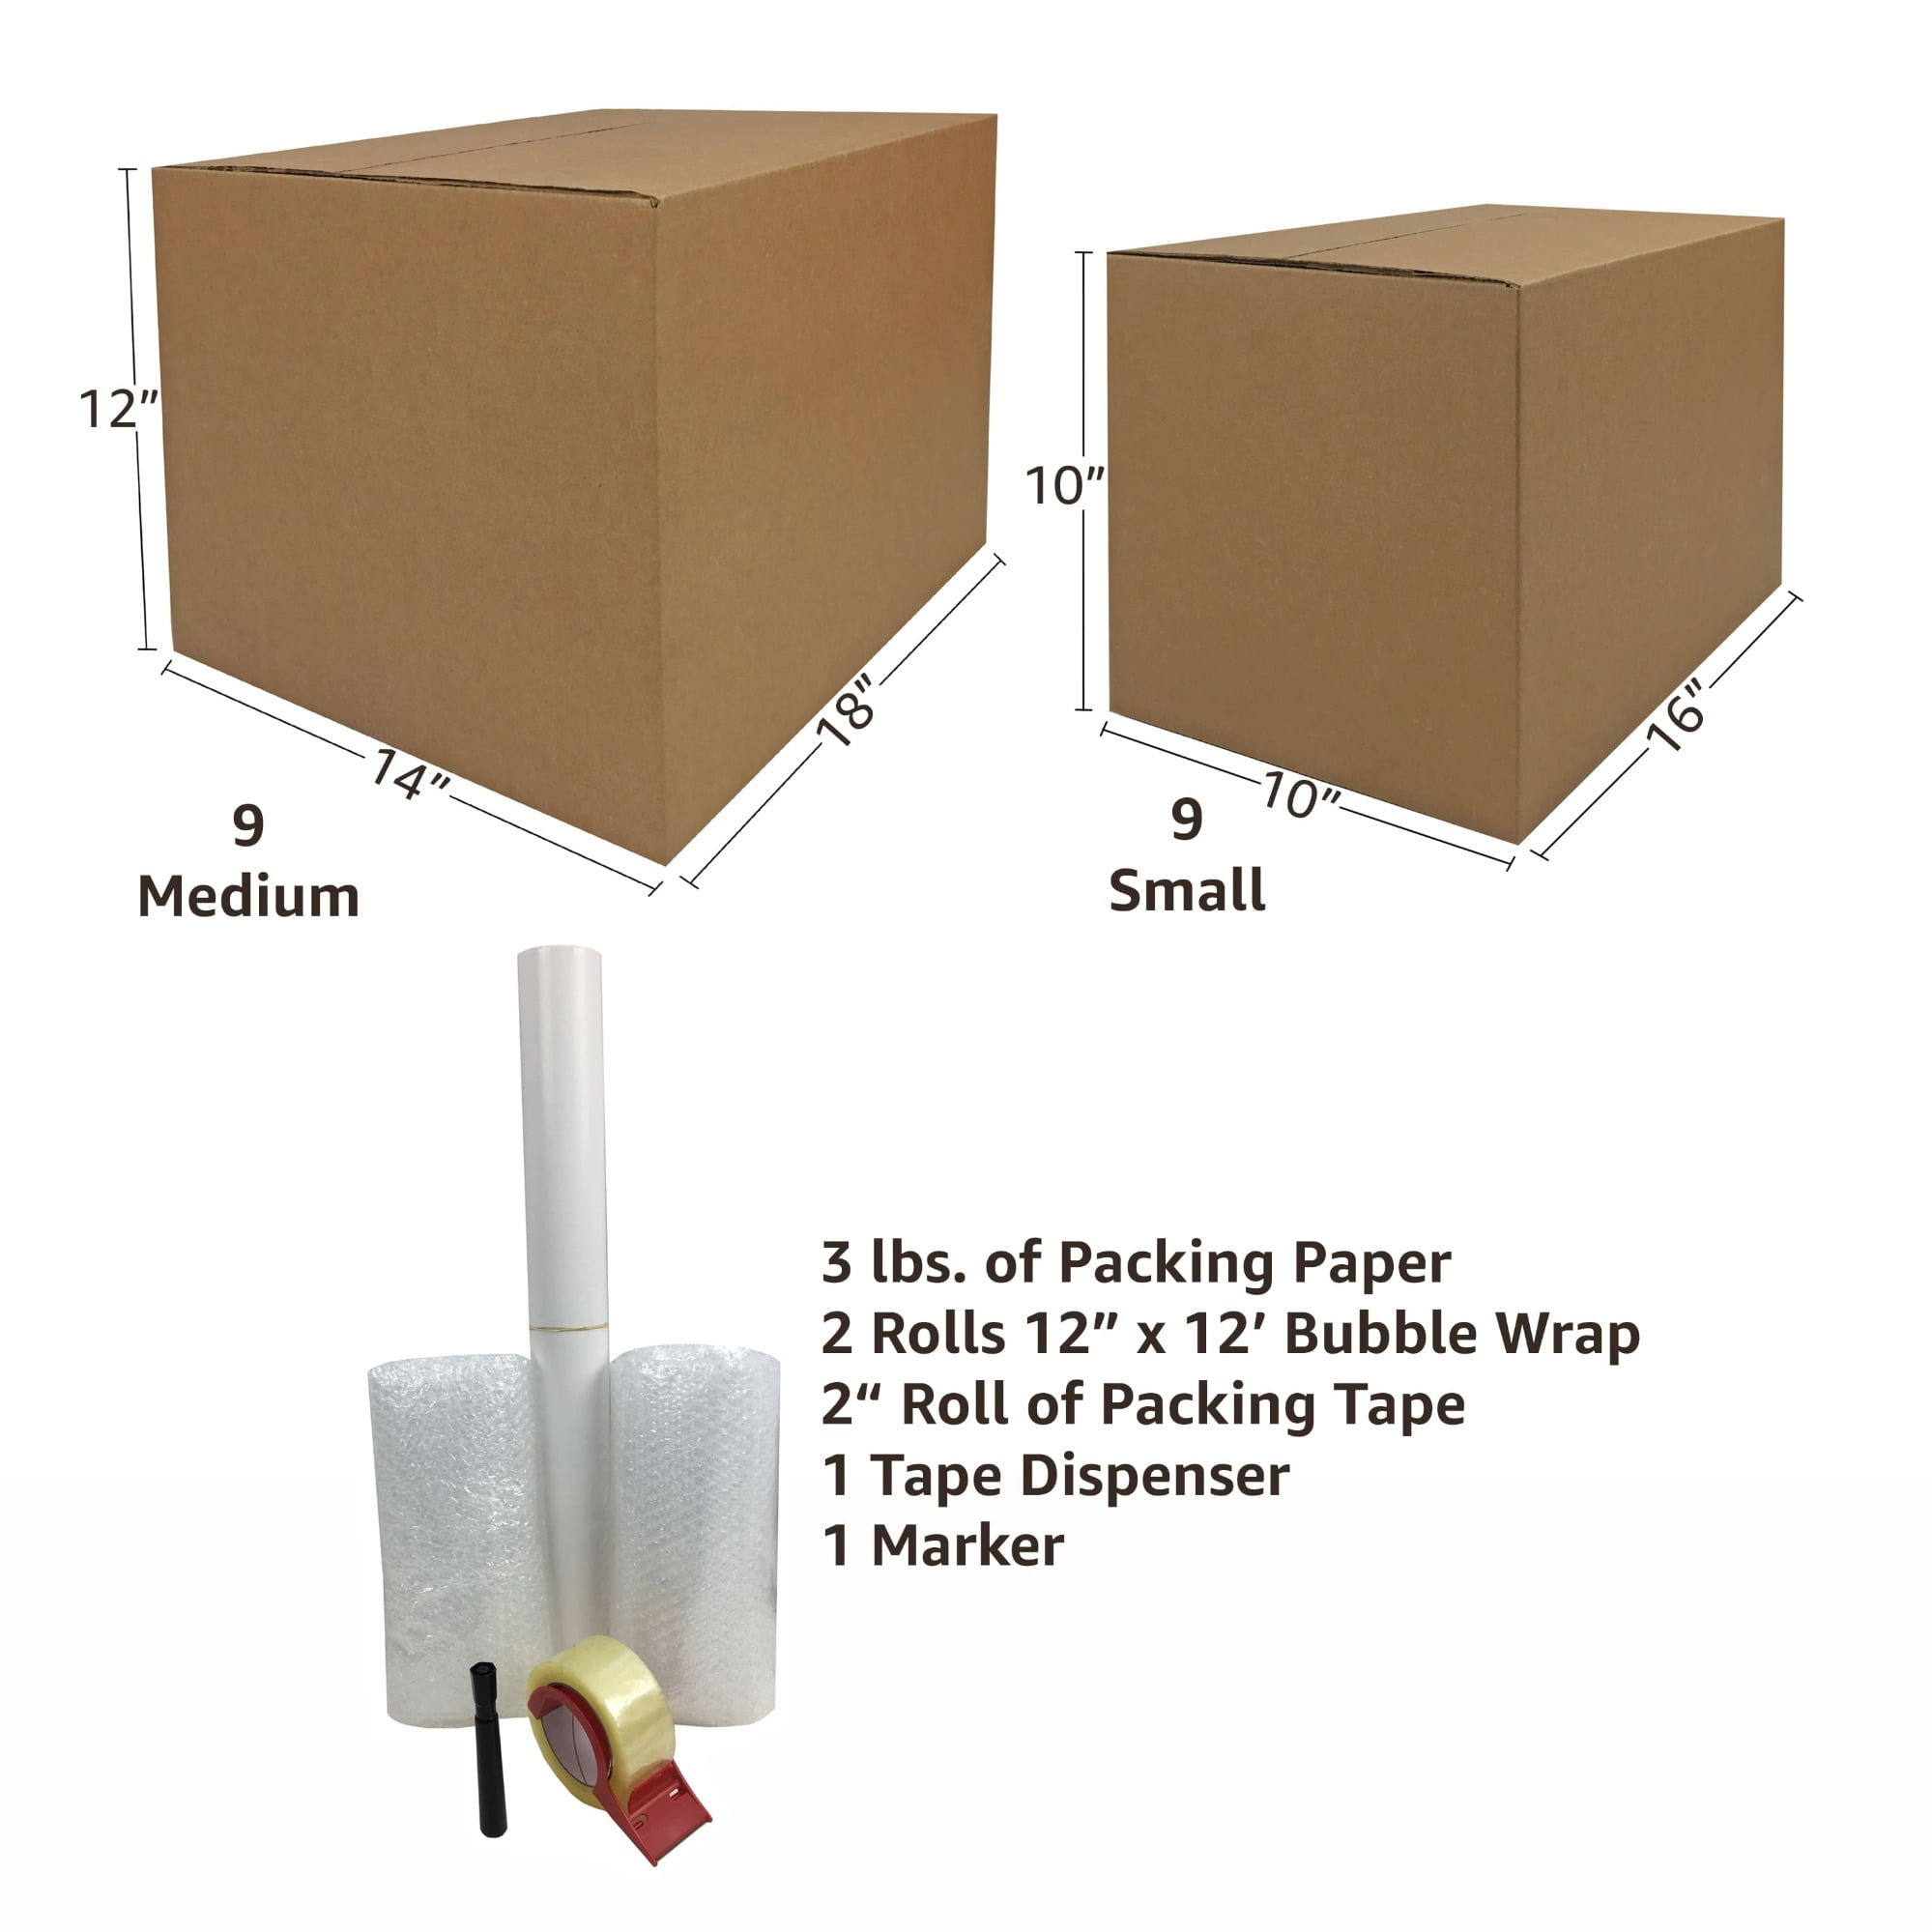  uBoxes 1 Room Basic Moving Kit, 18 Boxes, 24 feet Bubble, 3  lbs Paper and 110 yards Tape : Box Mailers : Office Products